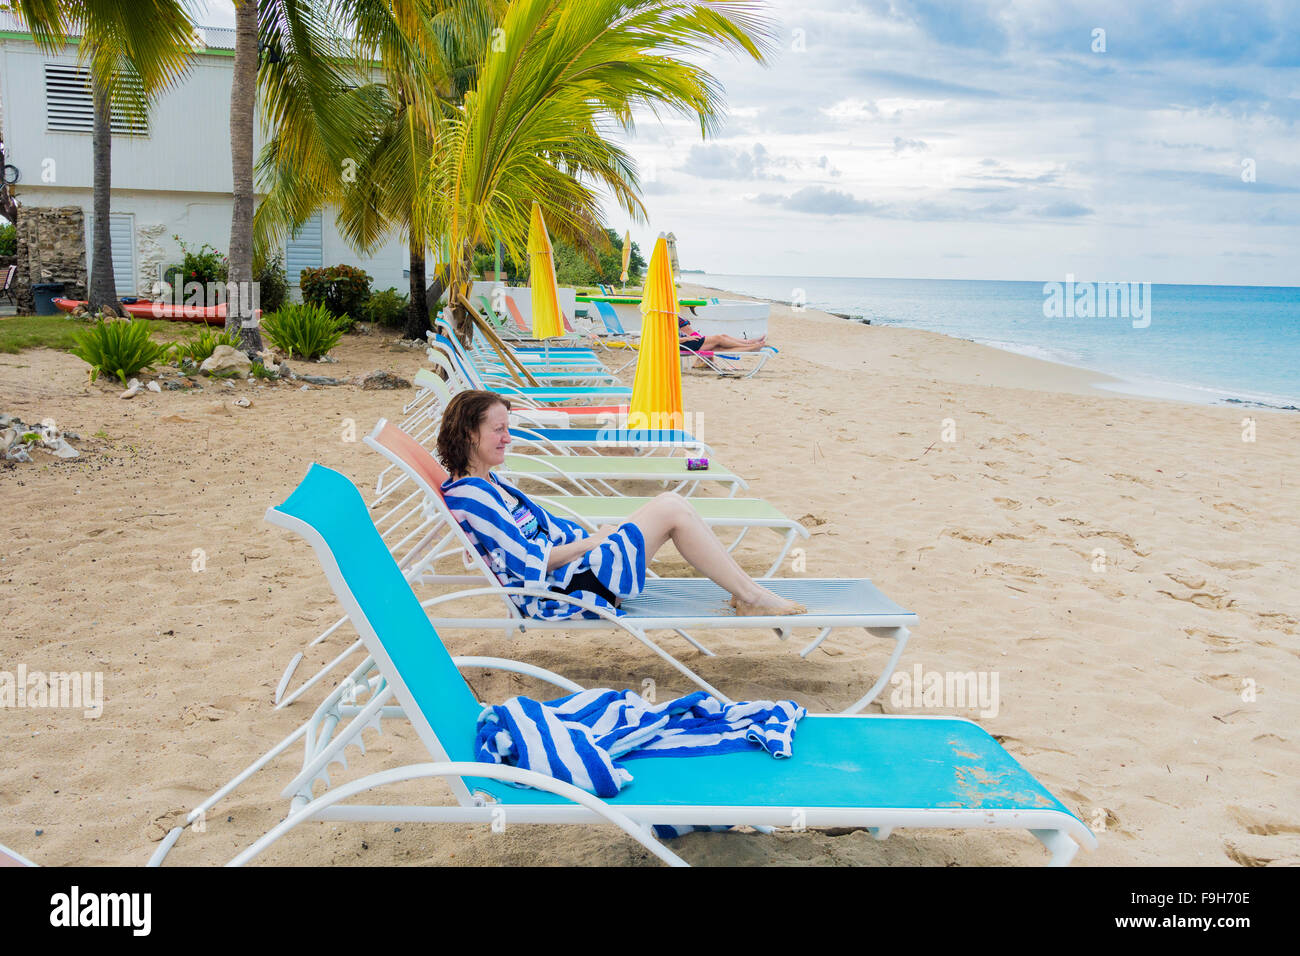 A 50 year old female guest at a beachside resort, wraps up in a beach towel and looks out to sea. Cottages by the Sea resort. Stock Photo